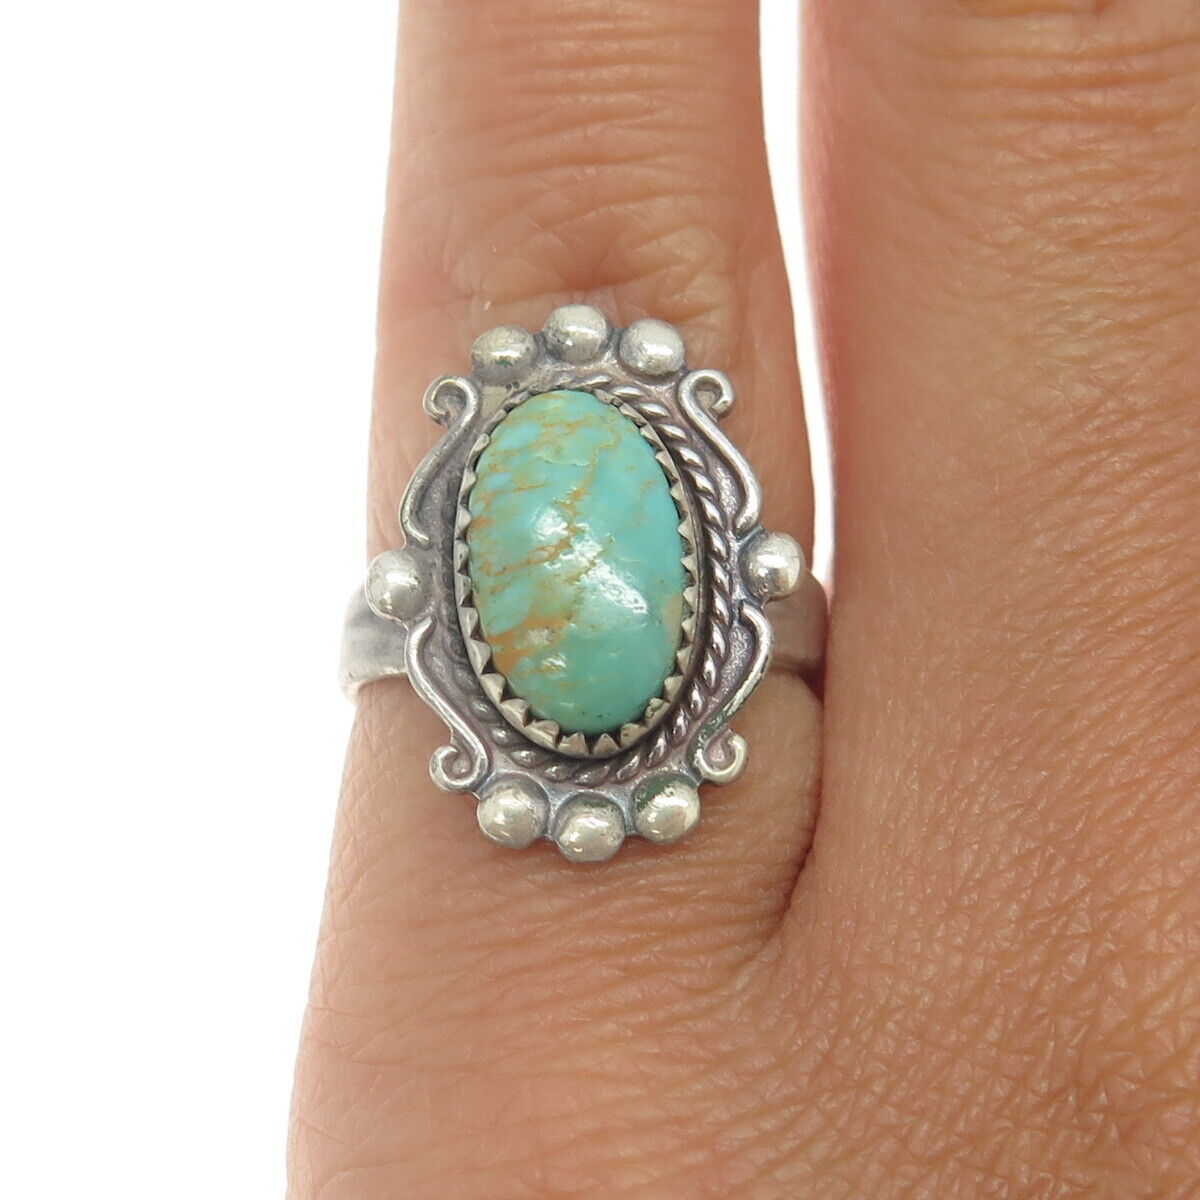 BELL TRADING POST Old Pawn 925 Sterling Silver Real Turquoise Tribal Ring Size 5